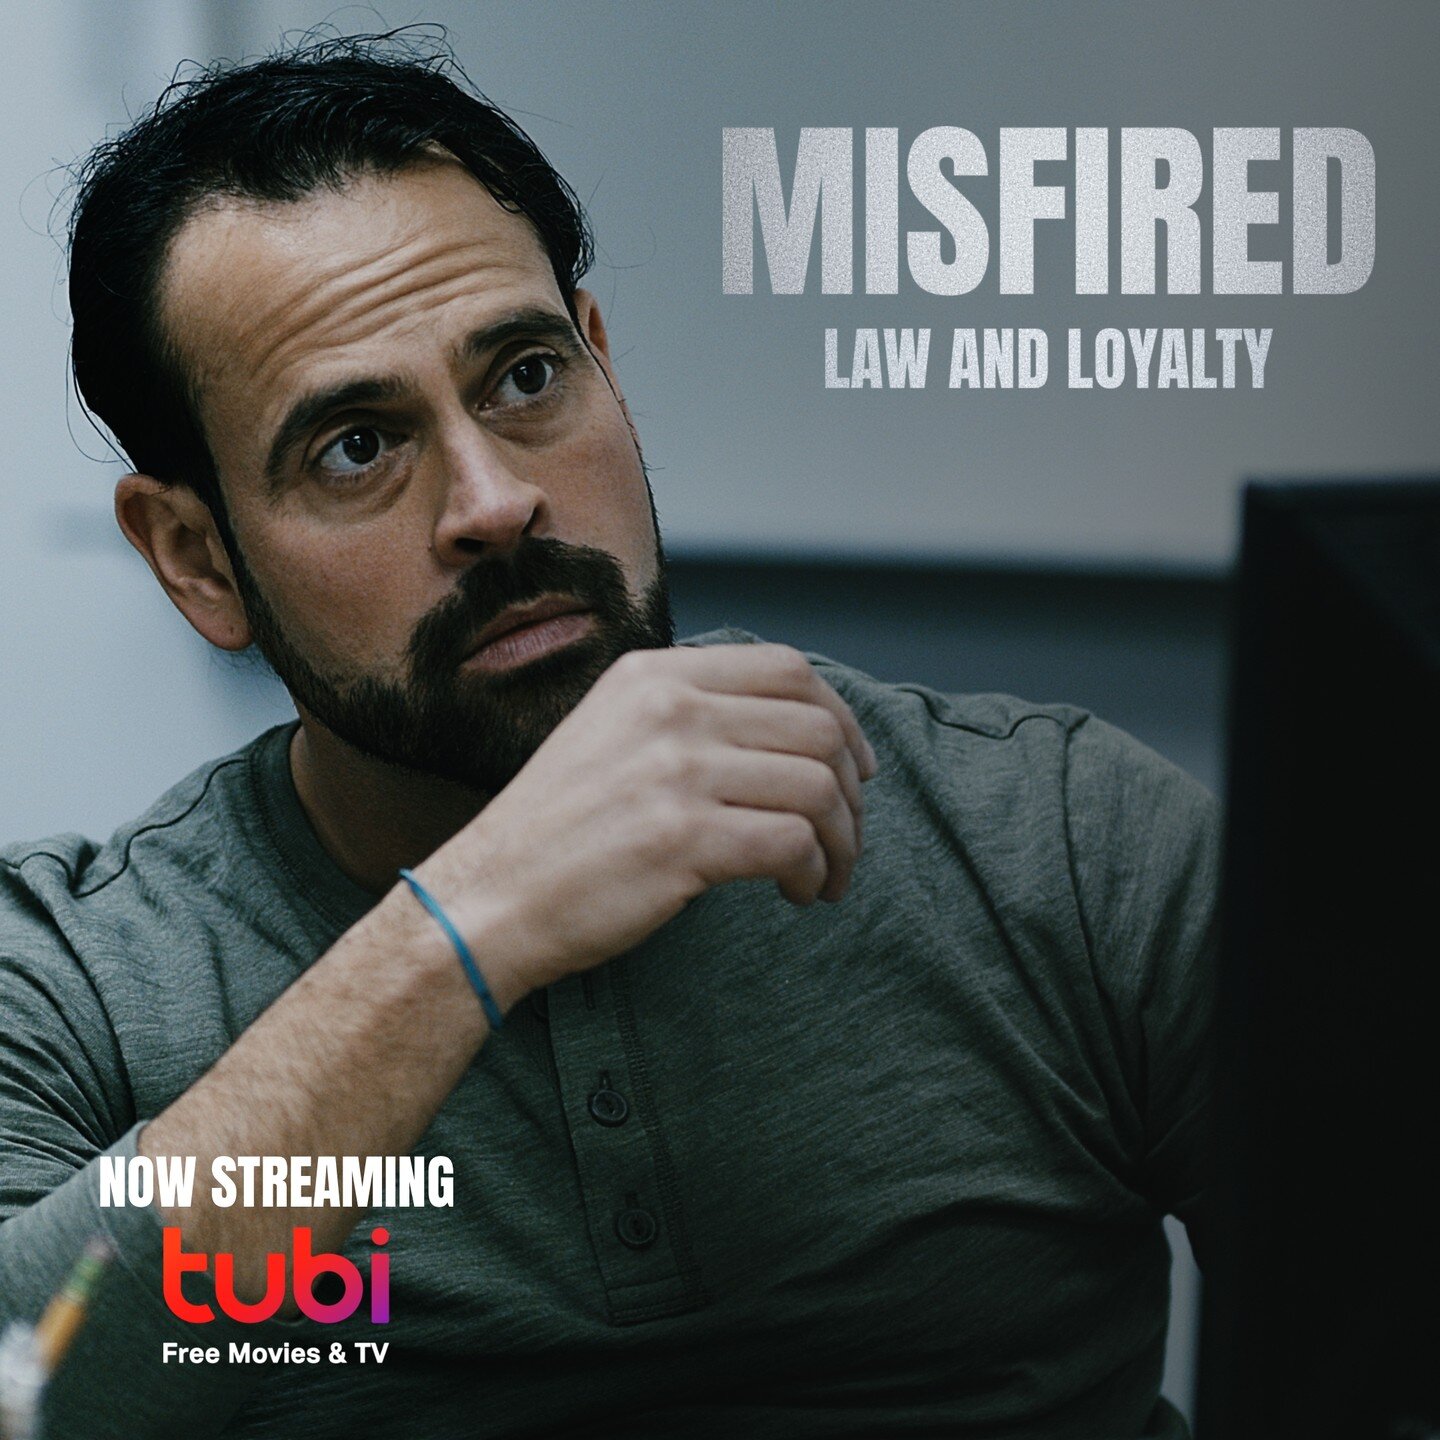 So here is the first installment of MISFIRED: Law and Loyalty. When I say I had a blast doing this project, I couldn't describe it any other way. I got to work with family. The effort that everyone put in from the actors to the crew was amazing. We s